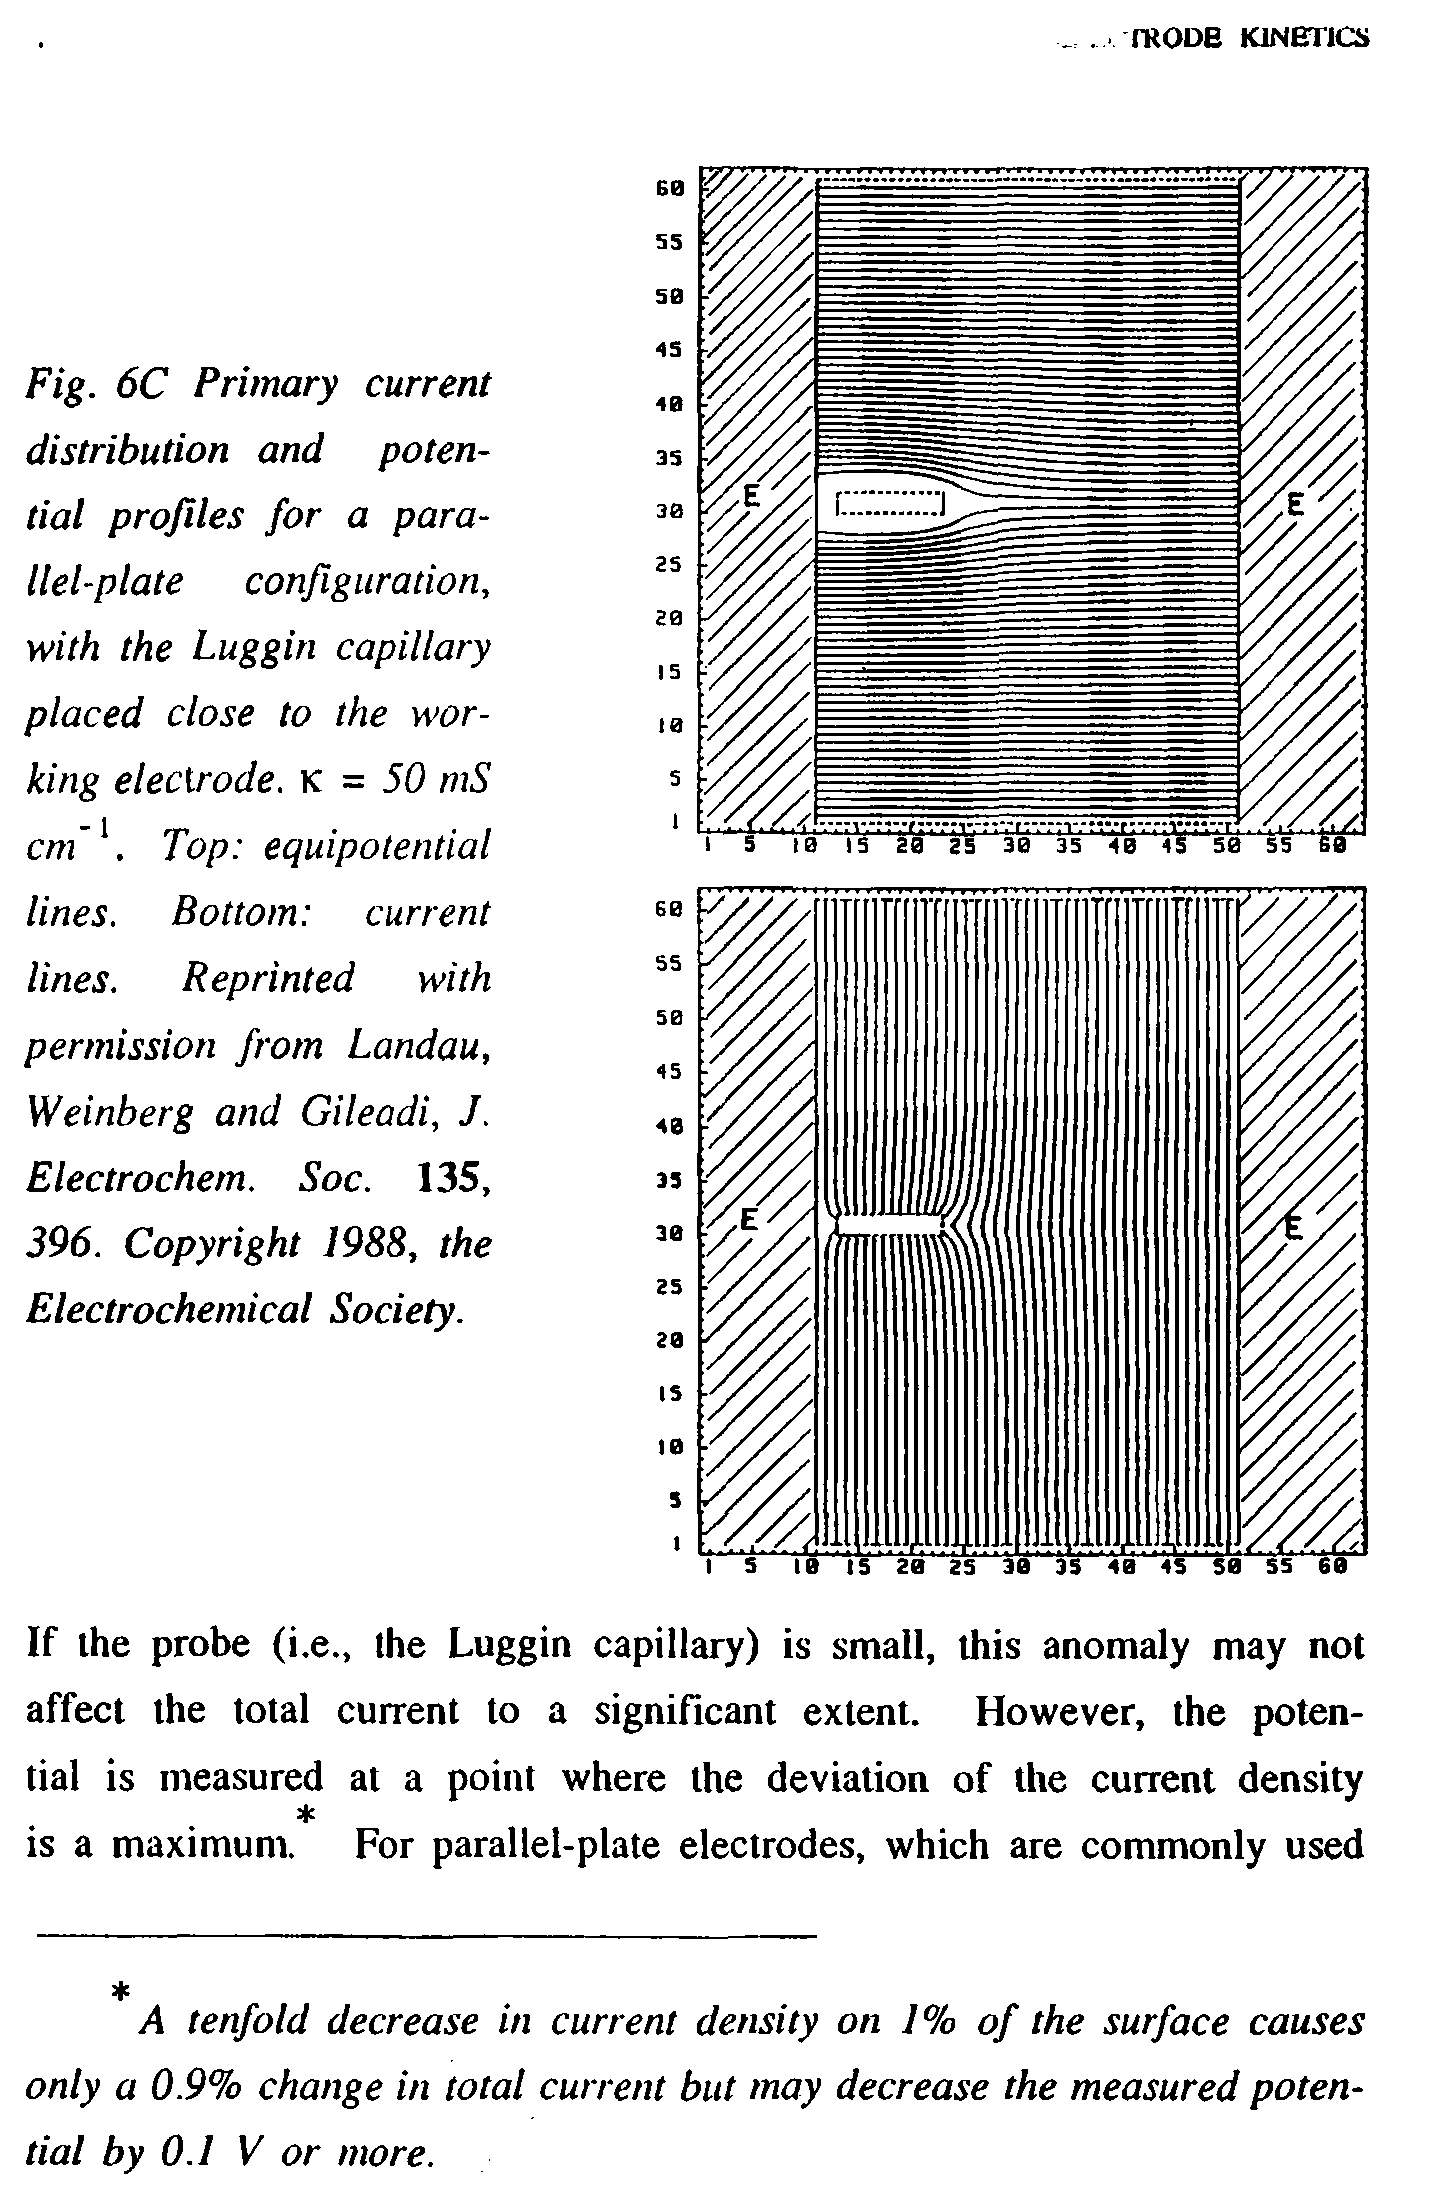 Fig. 6C Primary current distribution and potential profiles for a parallel-plate configuration, with the Luggin capillary placed close to the working electrode. K = 50 mS c/ r. Top equipotential lines. Bottom current lines. Reprinted with permission from Landau, Weinberg and Gileadi, J. Electrochem. Soc. 135, 396. Copyright 1988, the Electrochemical Society.